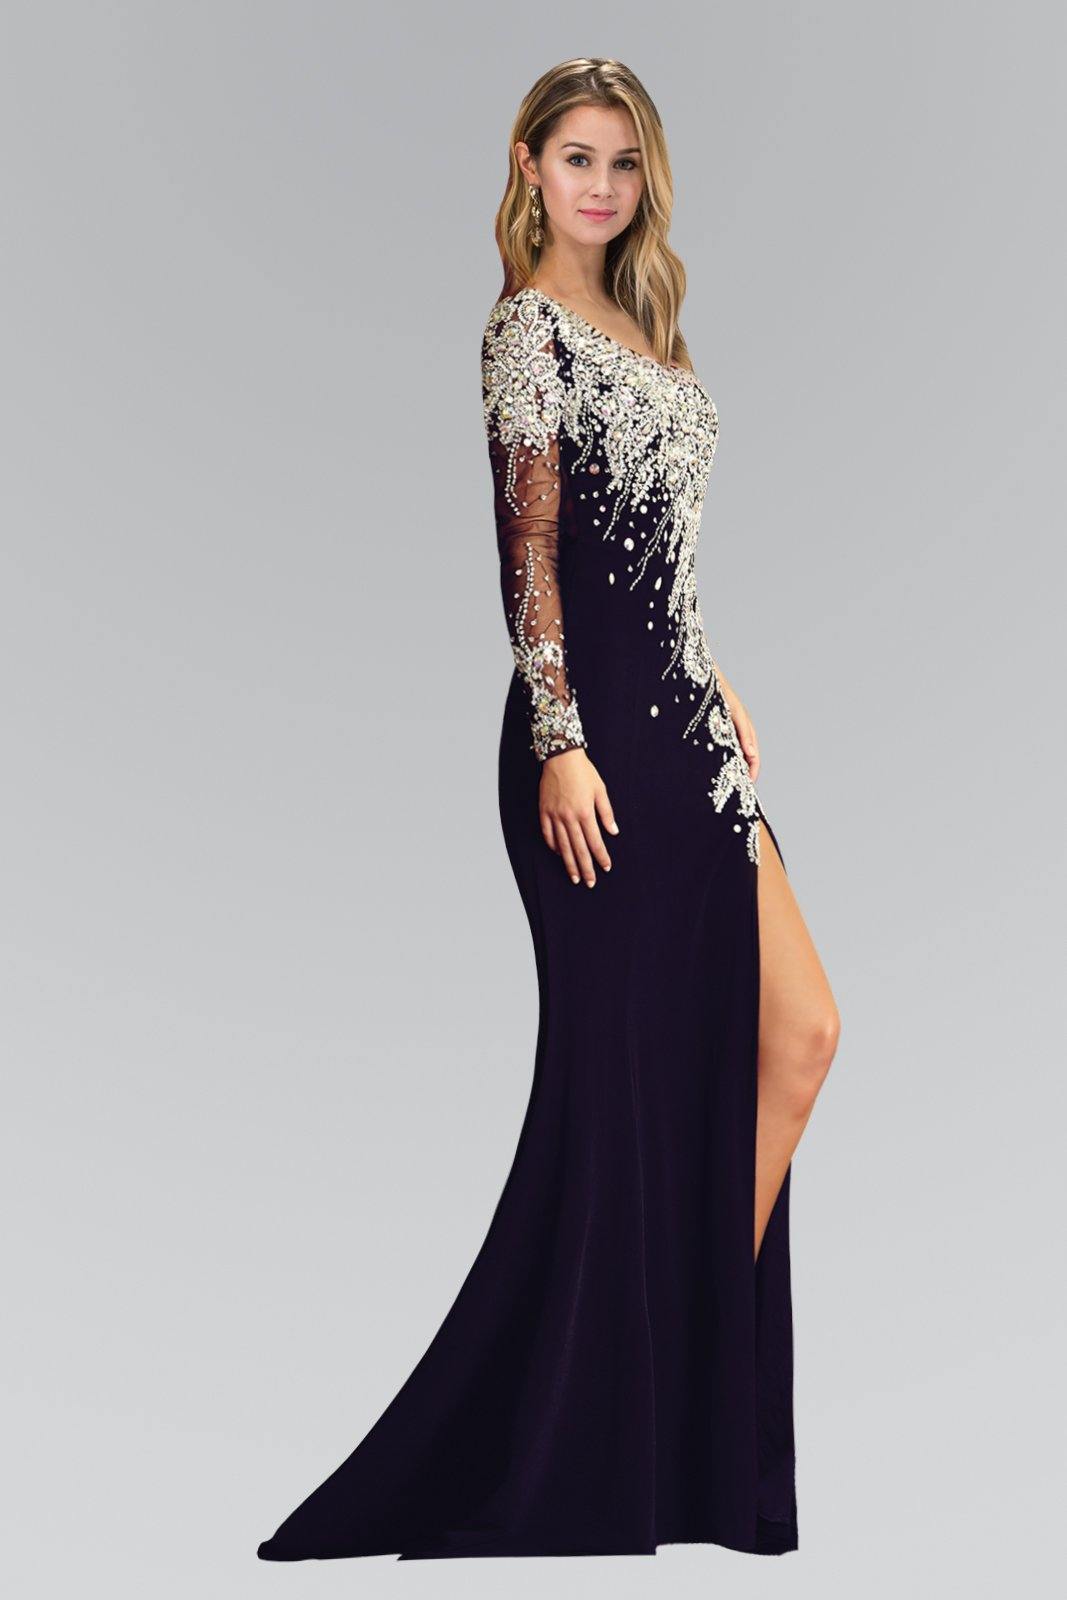 Long Prom Dress with Sparkling Sequins and Beads - The Dress Outlet Elizabeth K